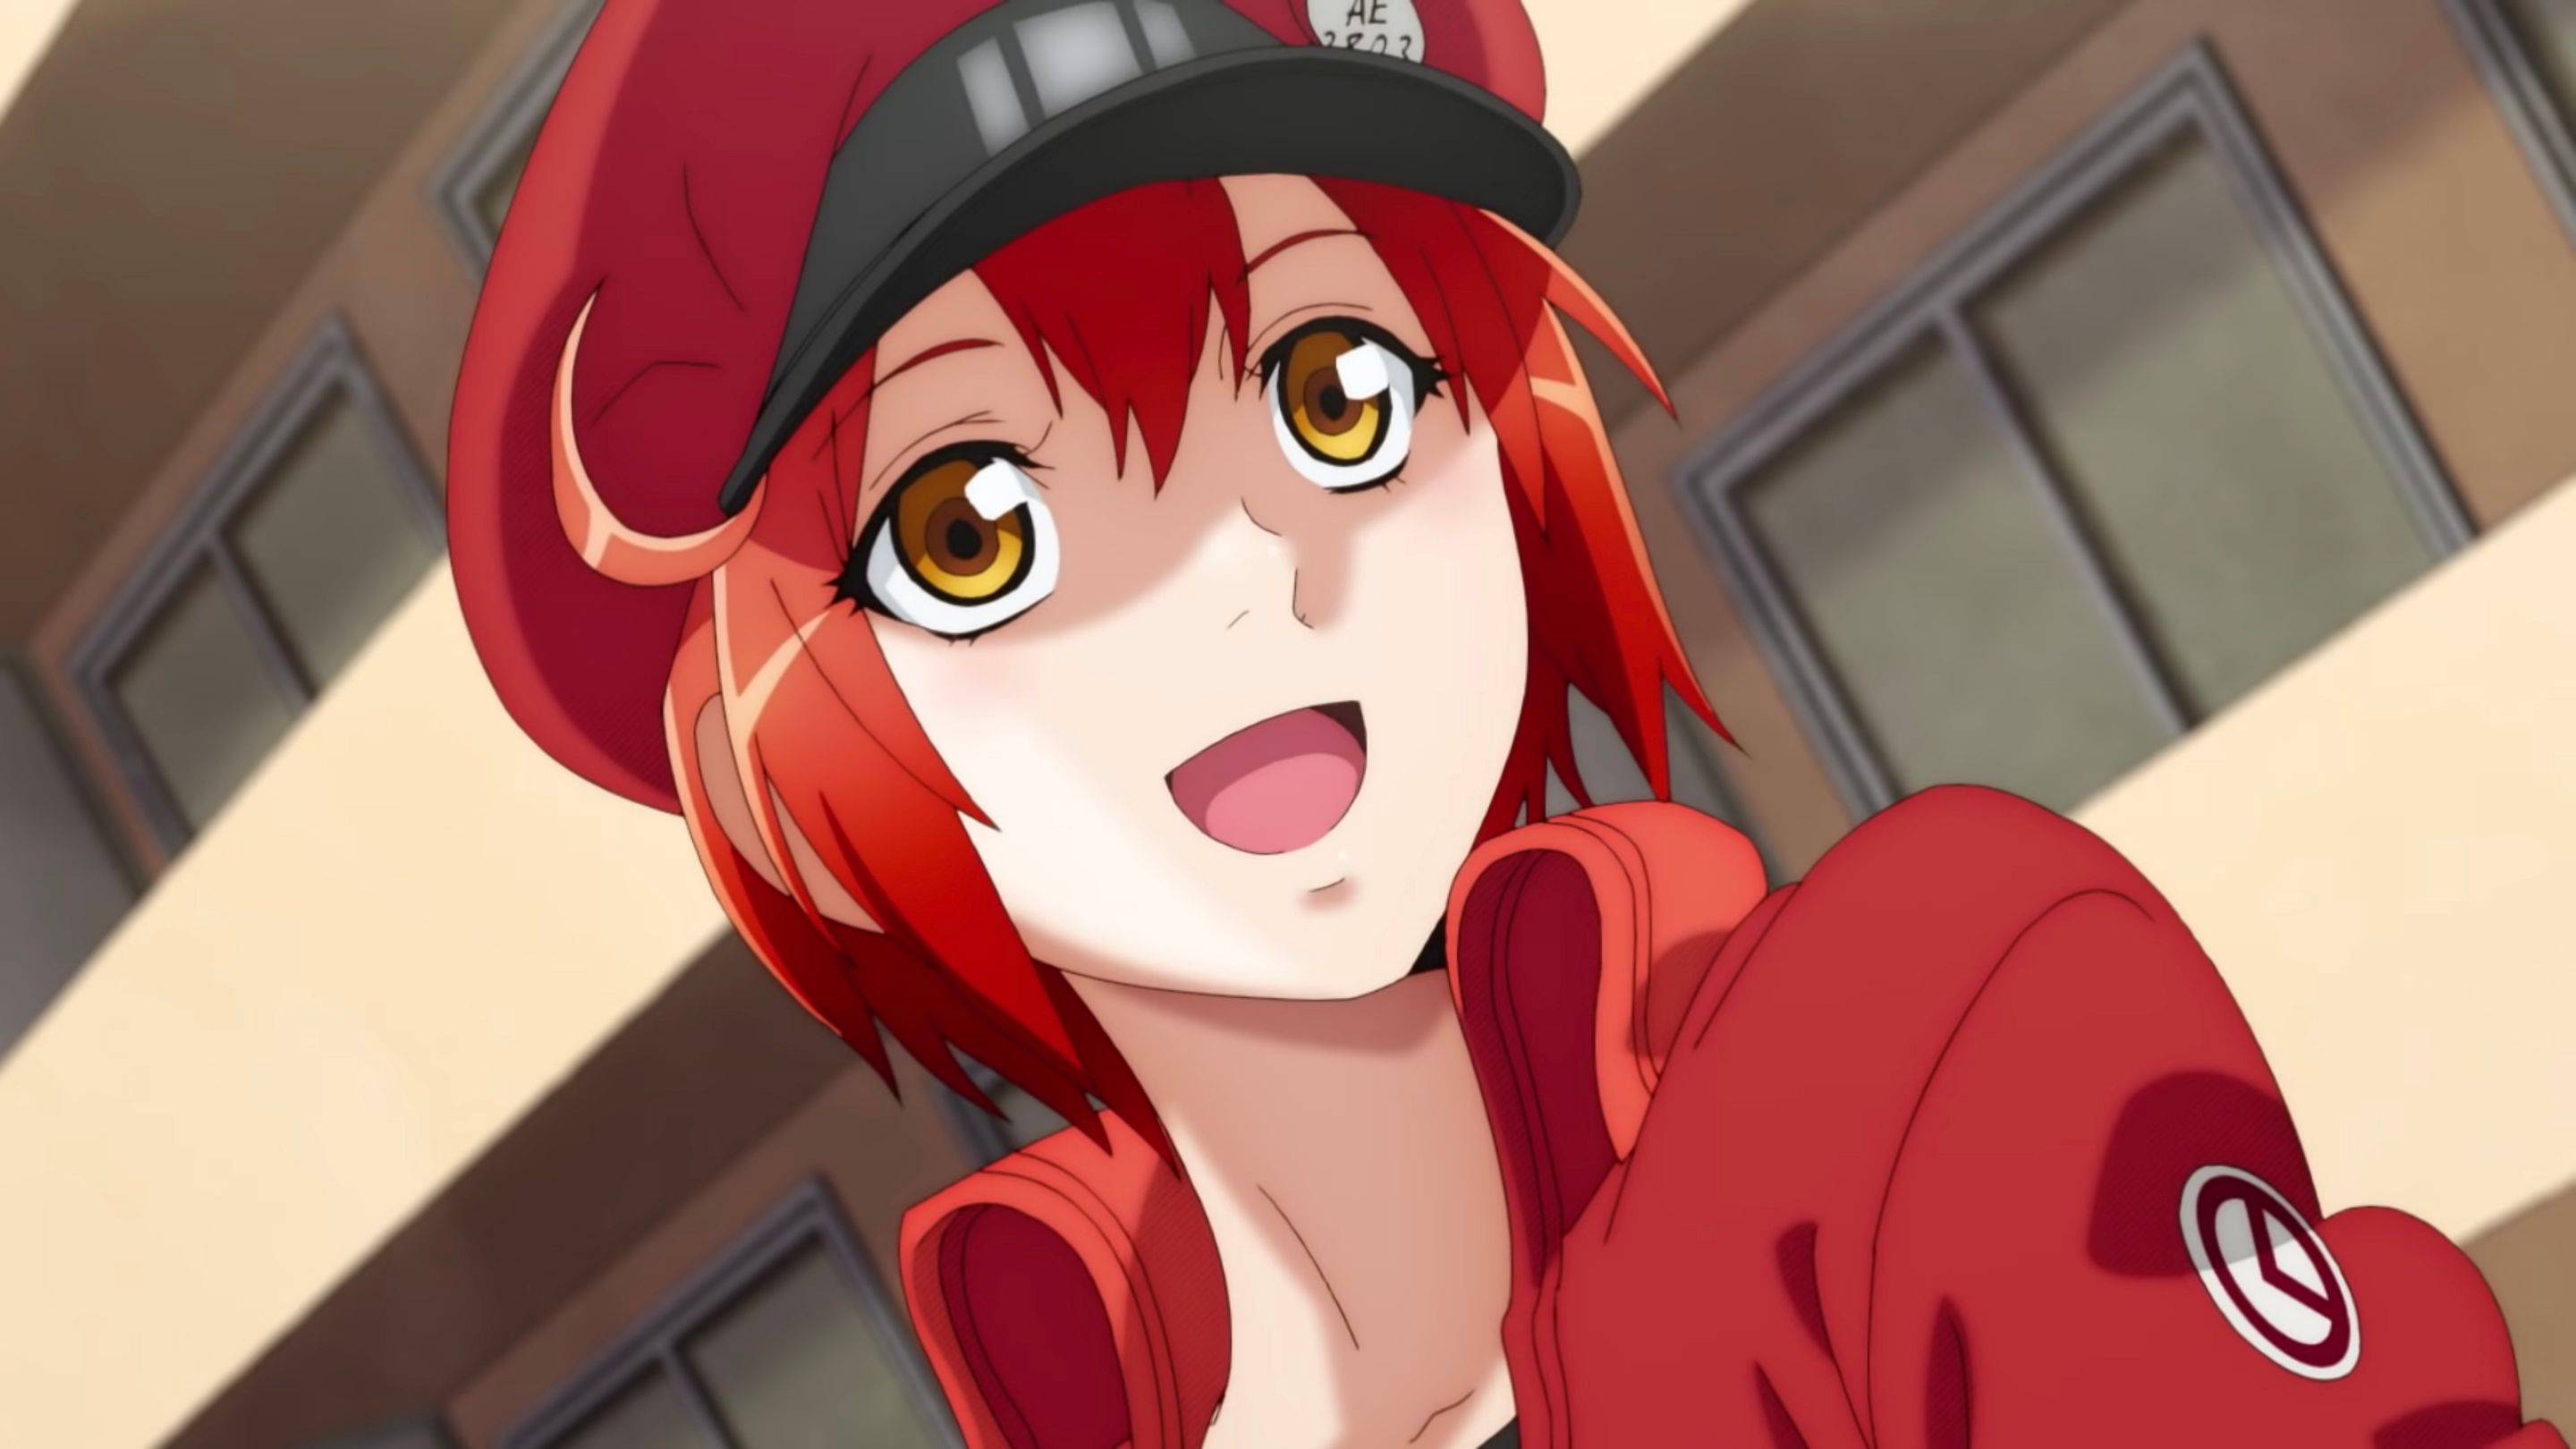 Cells at work | white blood cell x red blood cell | | Blood anime,  Character art, Anime